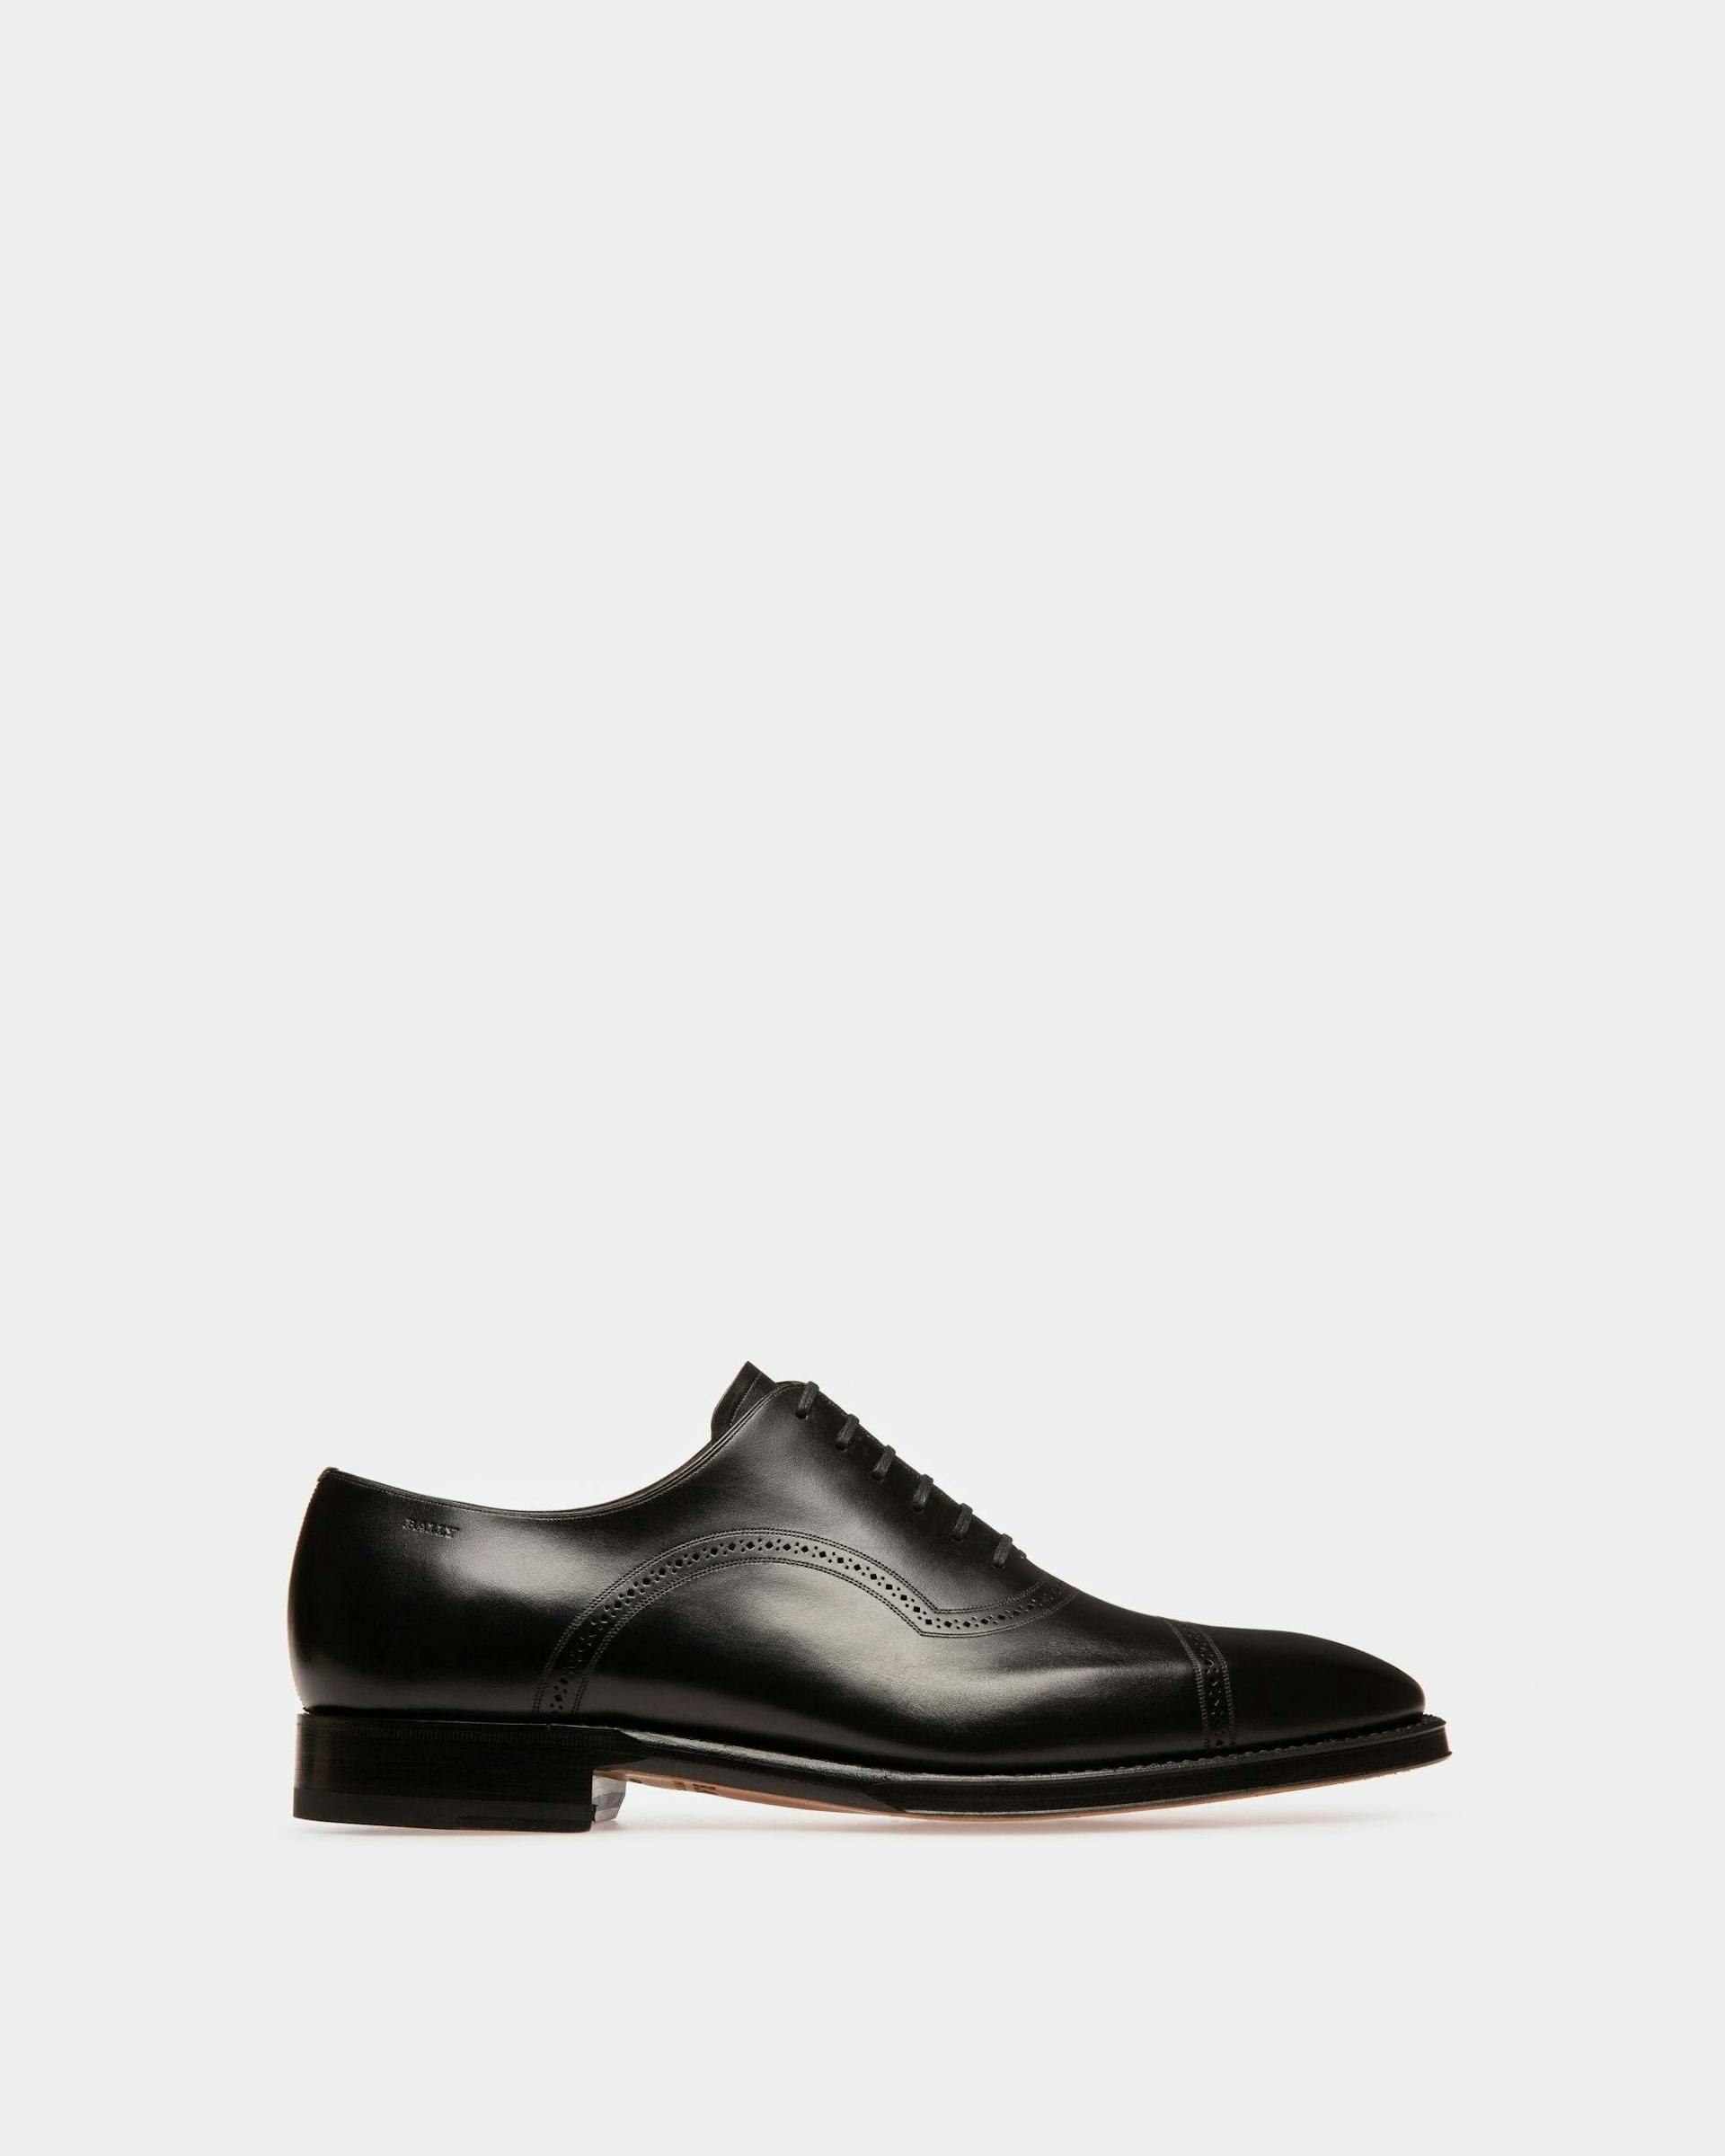 Scanio Men's Leather Oxford Lace-Up Shoe In Black - Herren - Bally - 01